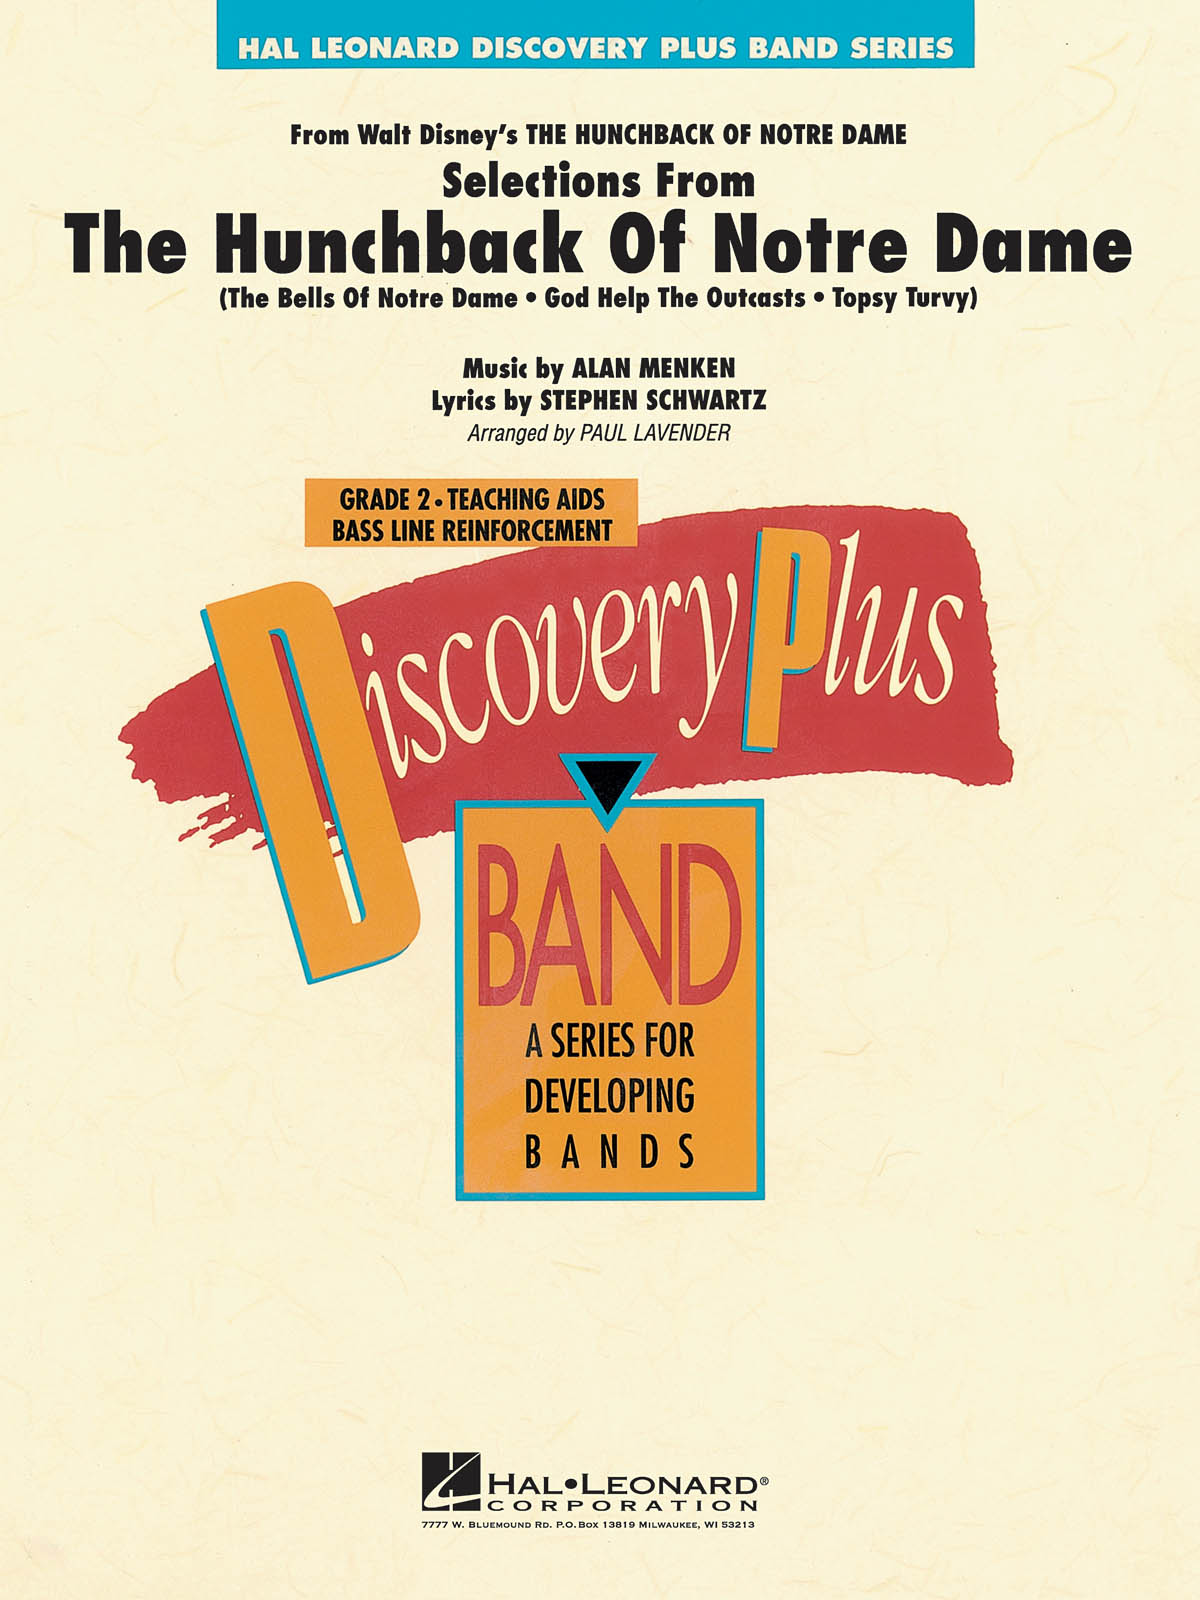 Selections from the Hunchback of the Notre Dame